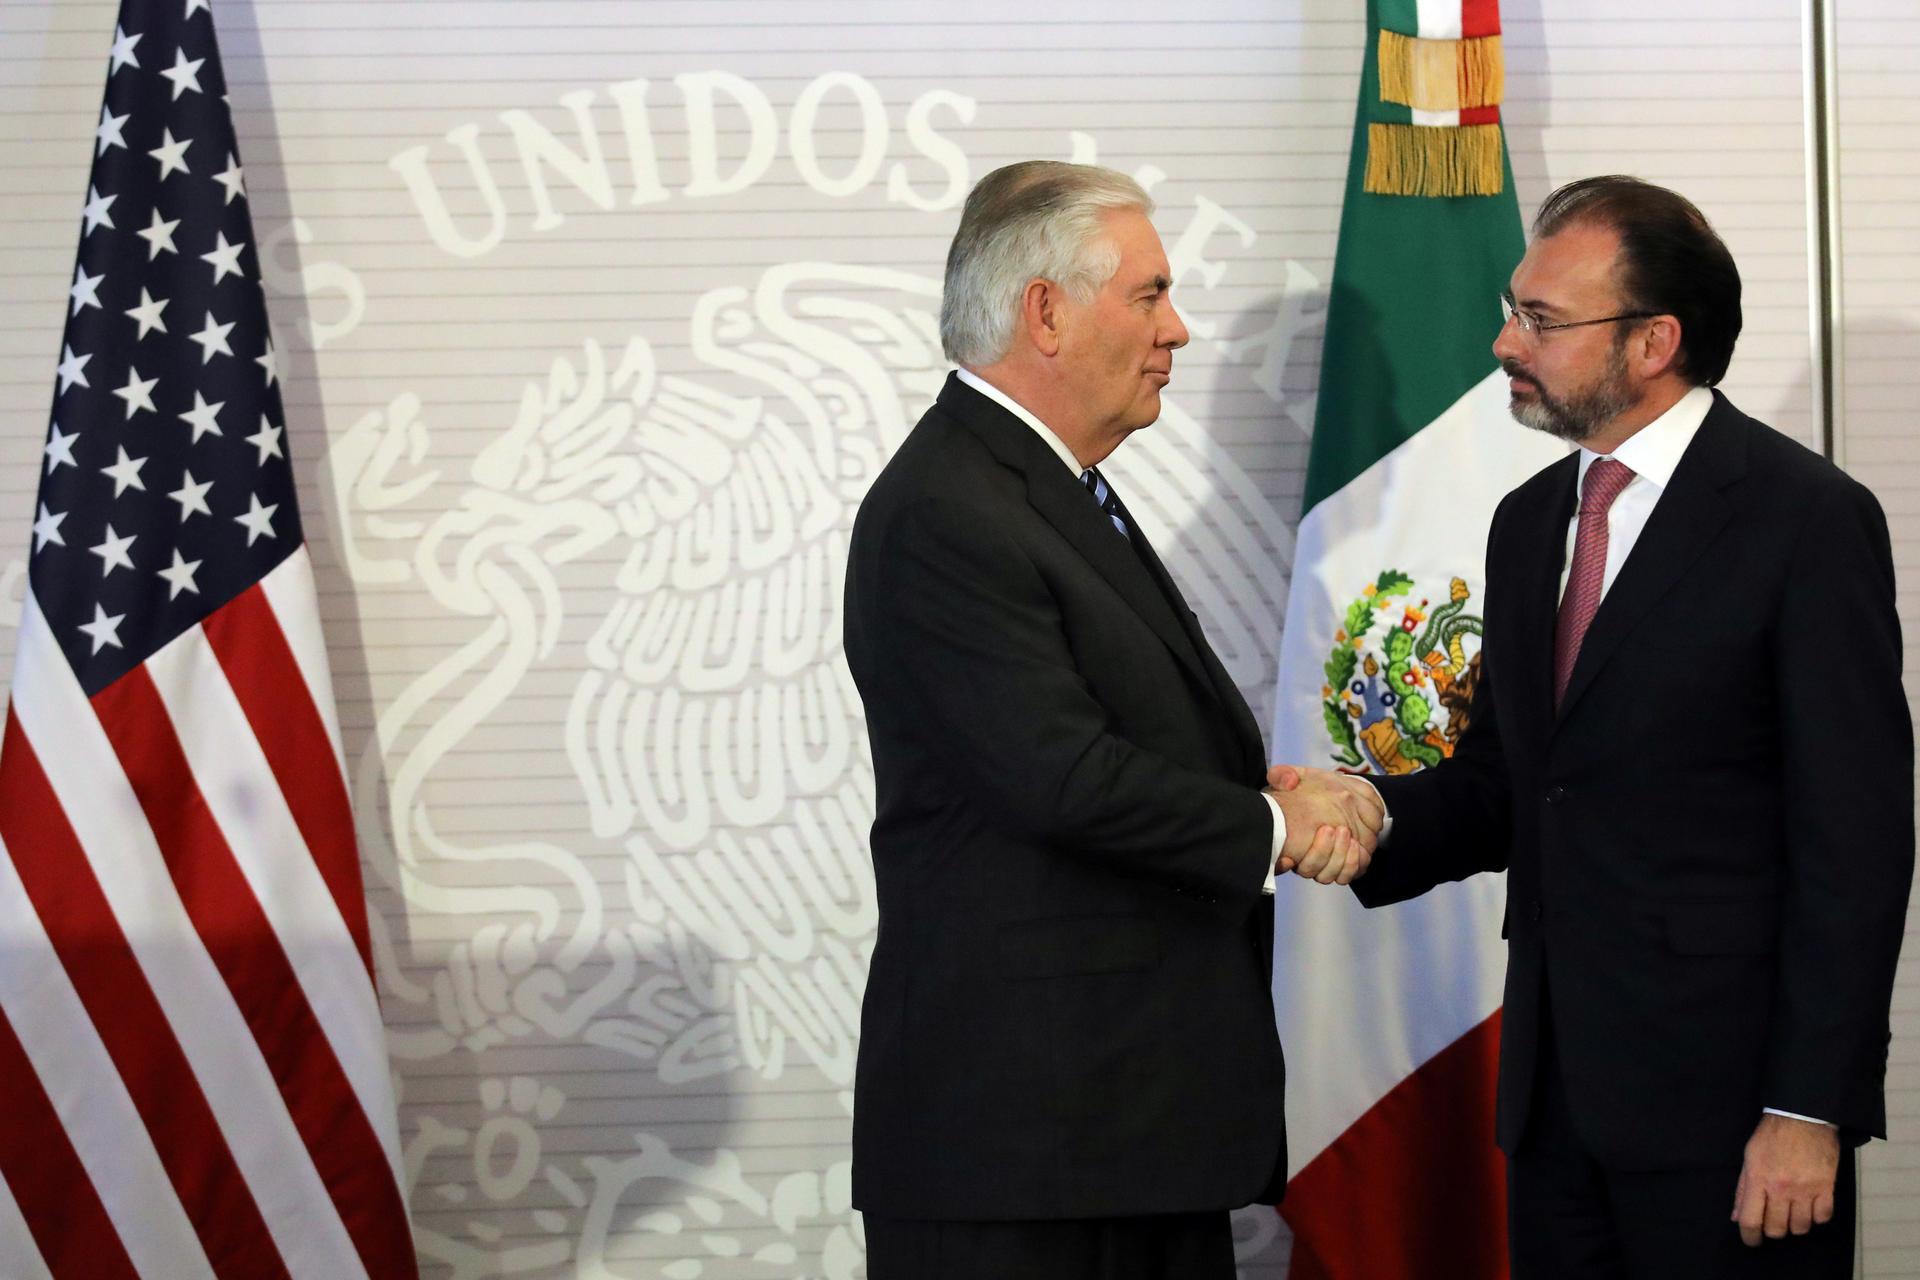 US Secretary of State Rex Tillerson, left, shakes hands with Mexico's Foreign Secretary Luis Videgaray after delivering statements at the Ministry of Foreign Affairs in Mexico City, Mexico, Feb. 23, 2017.